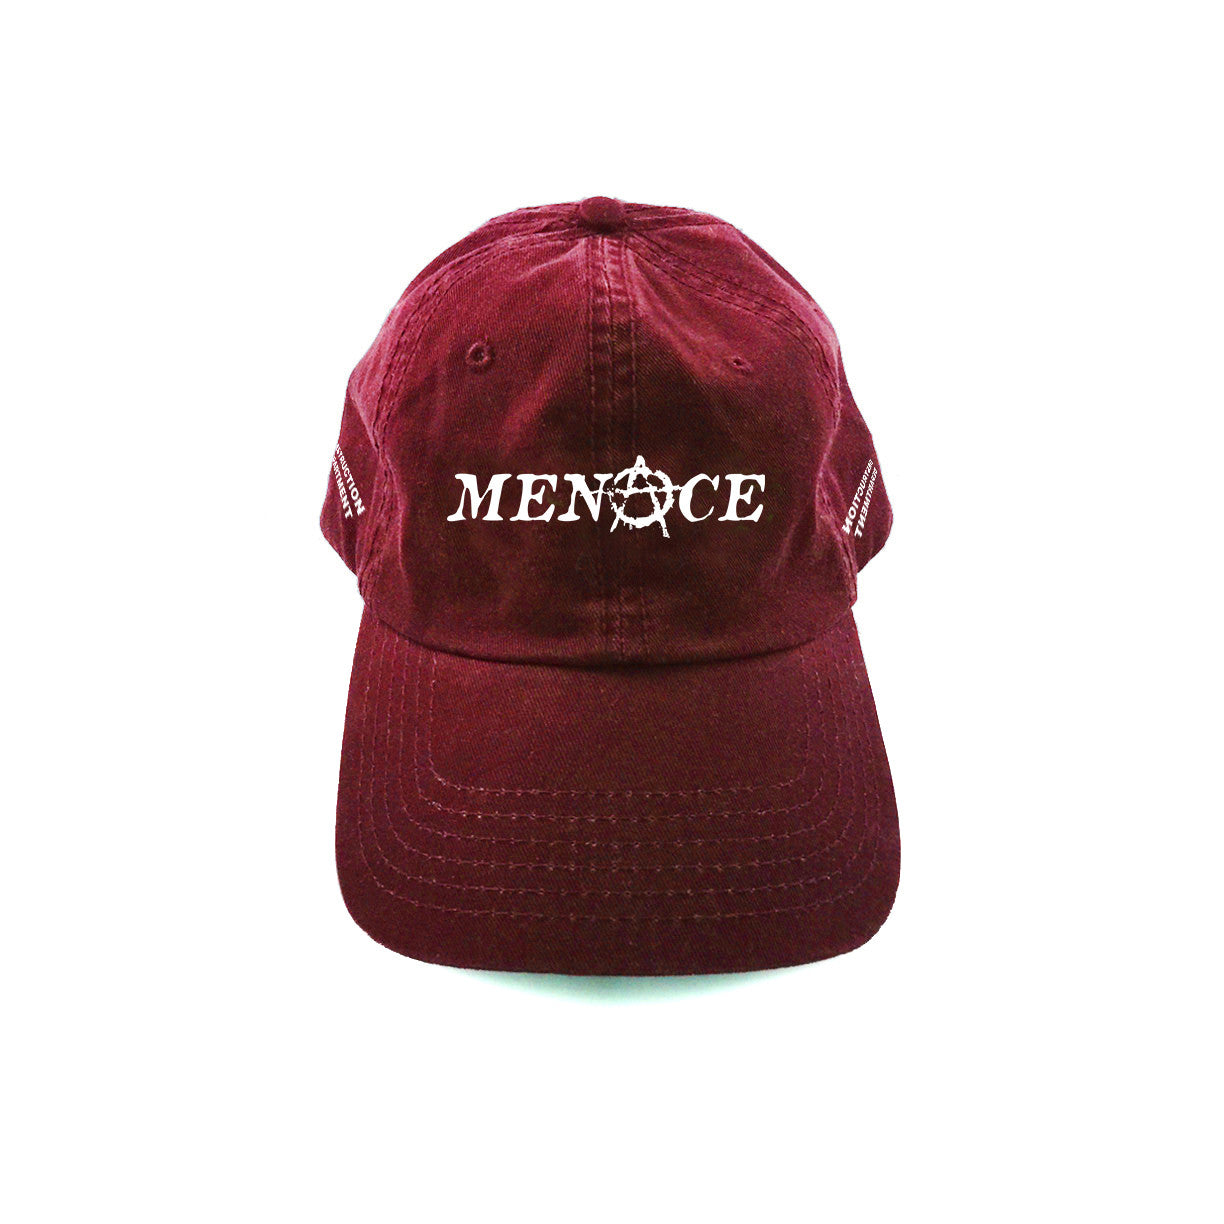 ANARCHY CAP by MENACE